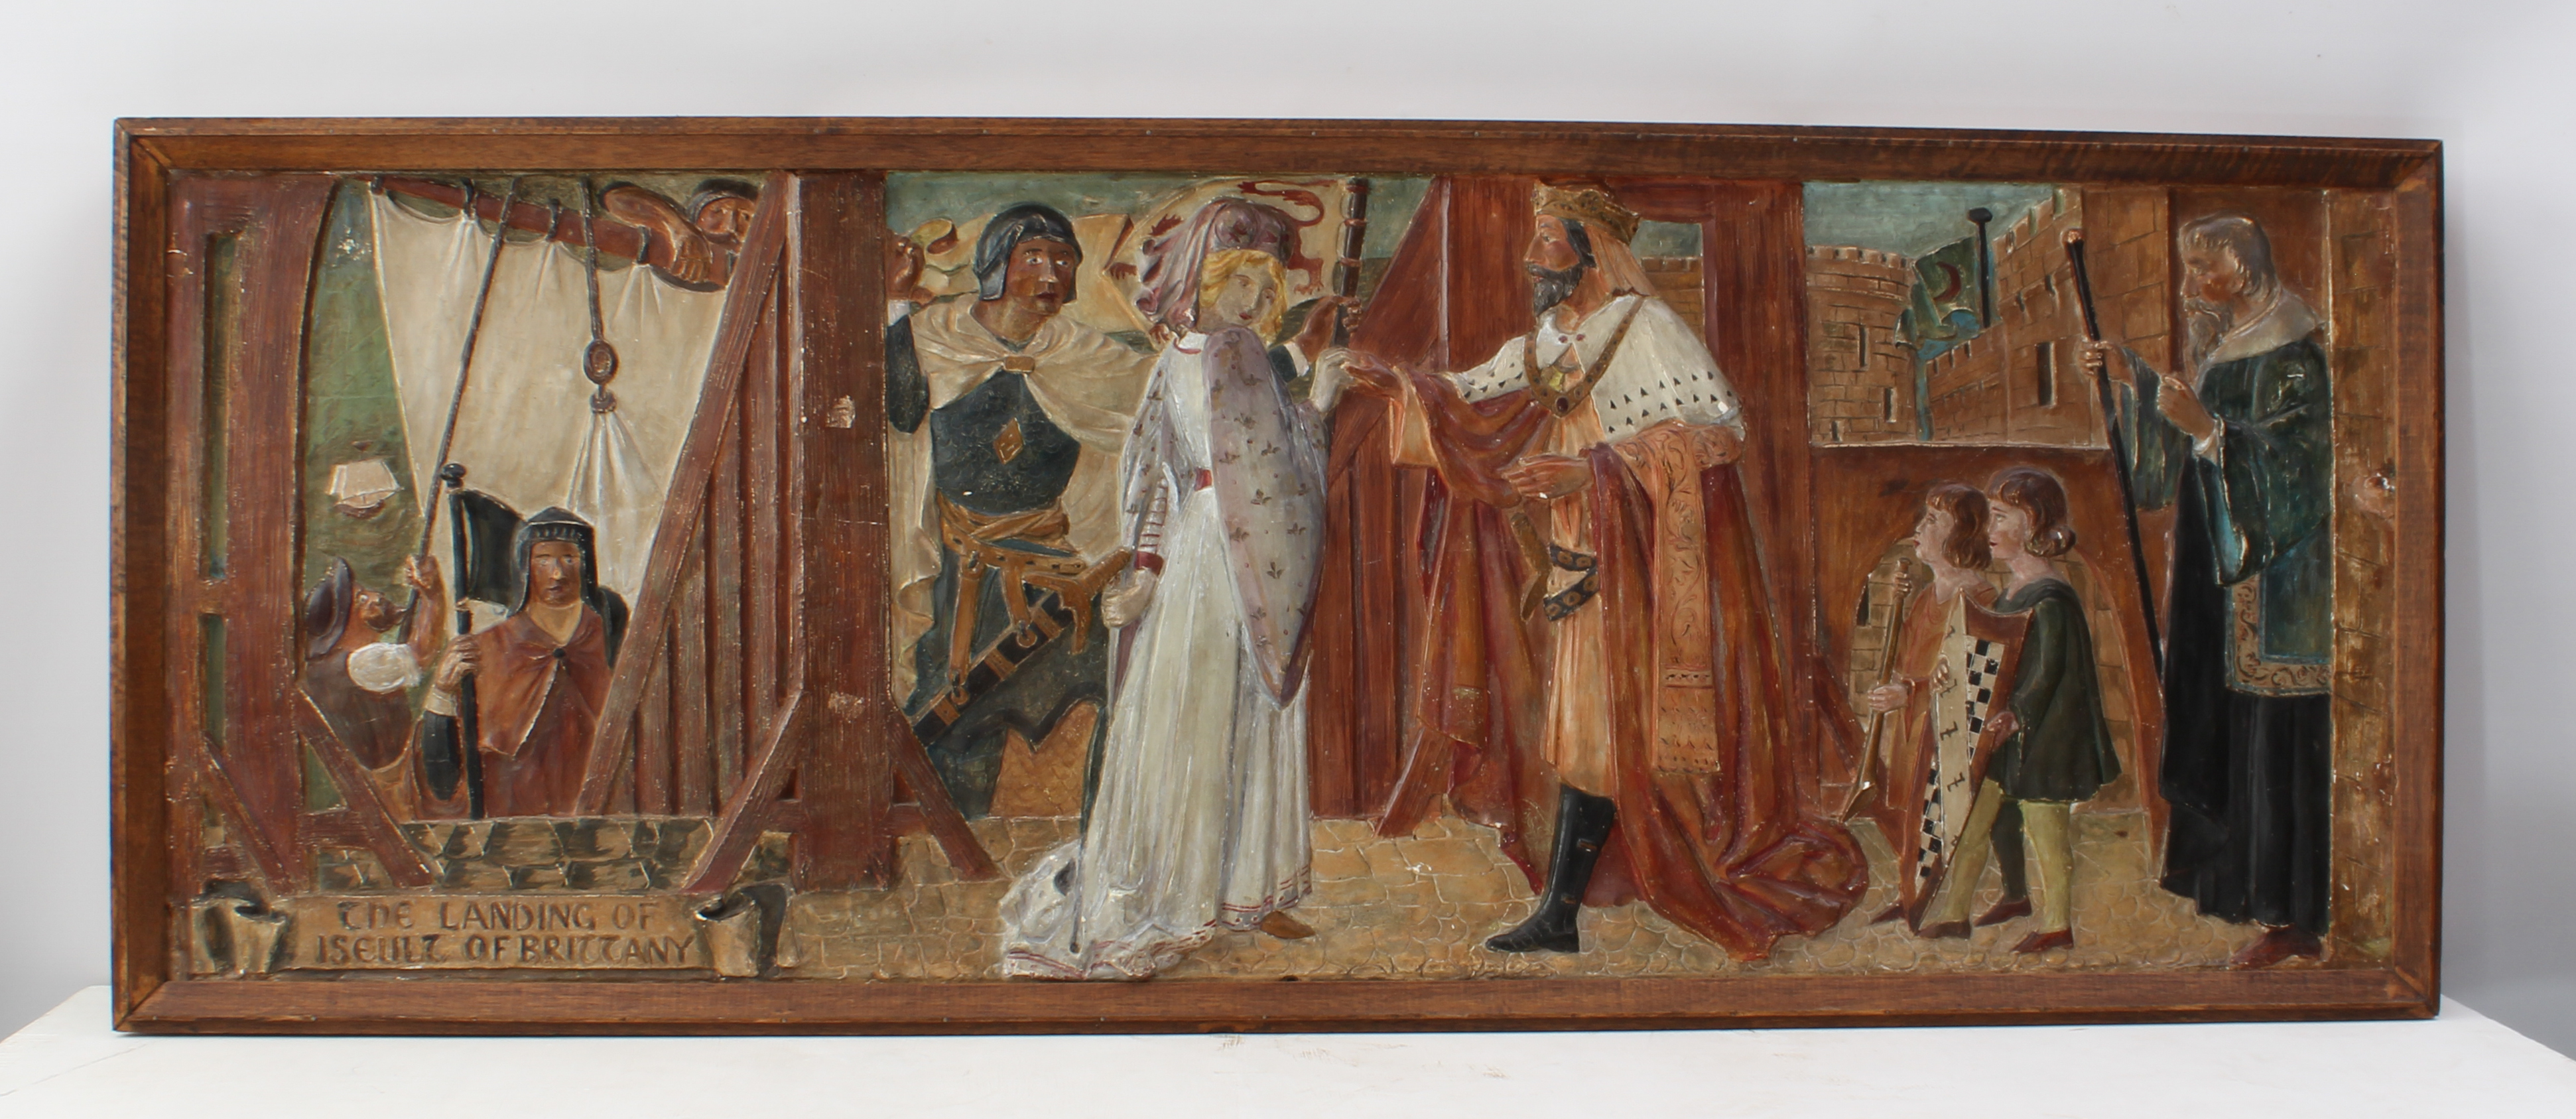 An Arts & Crafts style painted, relief moulded plaster panel depicting 'The Landing of Iseult of